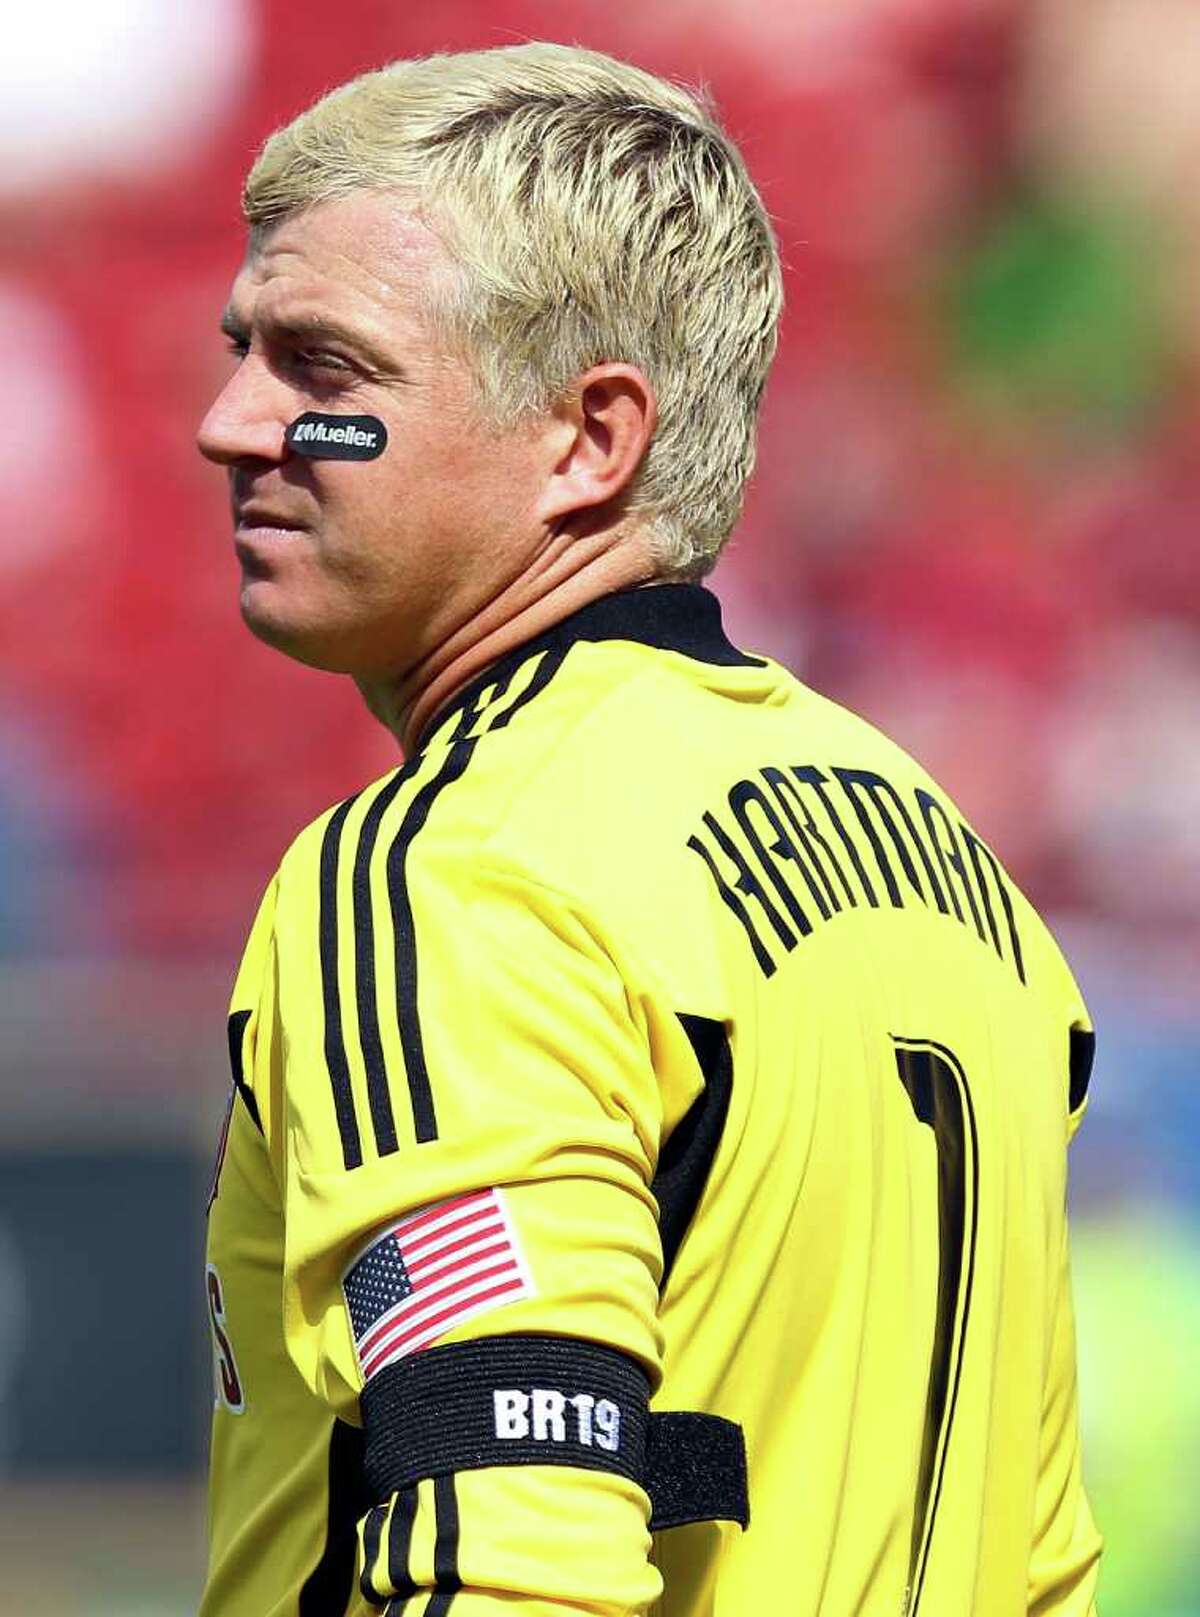 FRISCO, TX - SEPTEMBER 24: Kevin Hartman of FC Dallas wears an arm band in memory of Bobby Rhine during play against the Houston Dynamo at Pizza Hut Park on September 24, 2011 in Frisco, Texas.